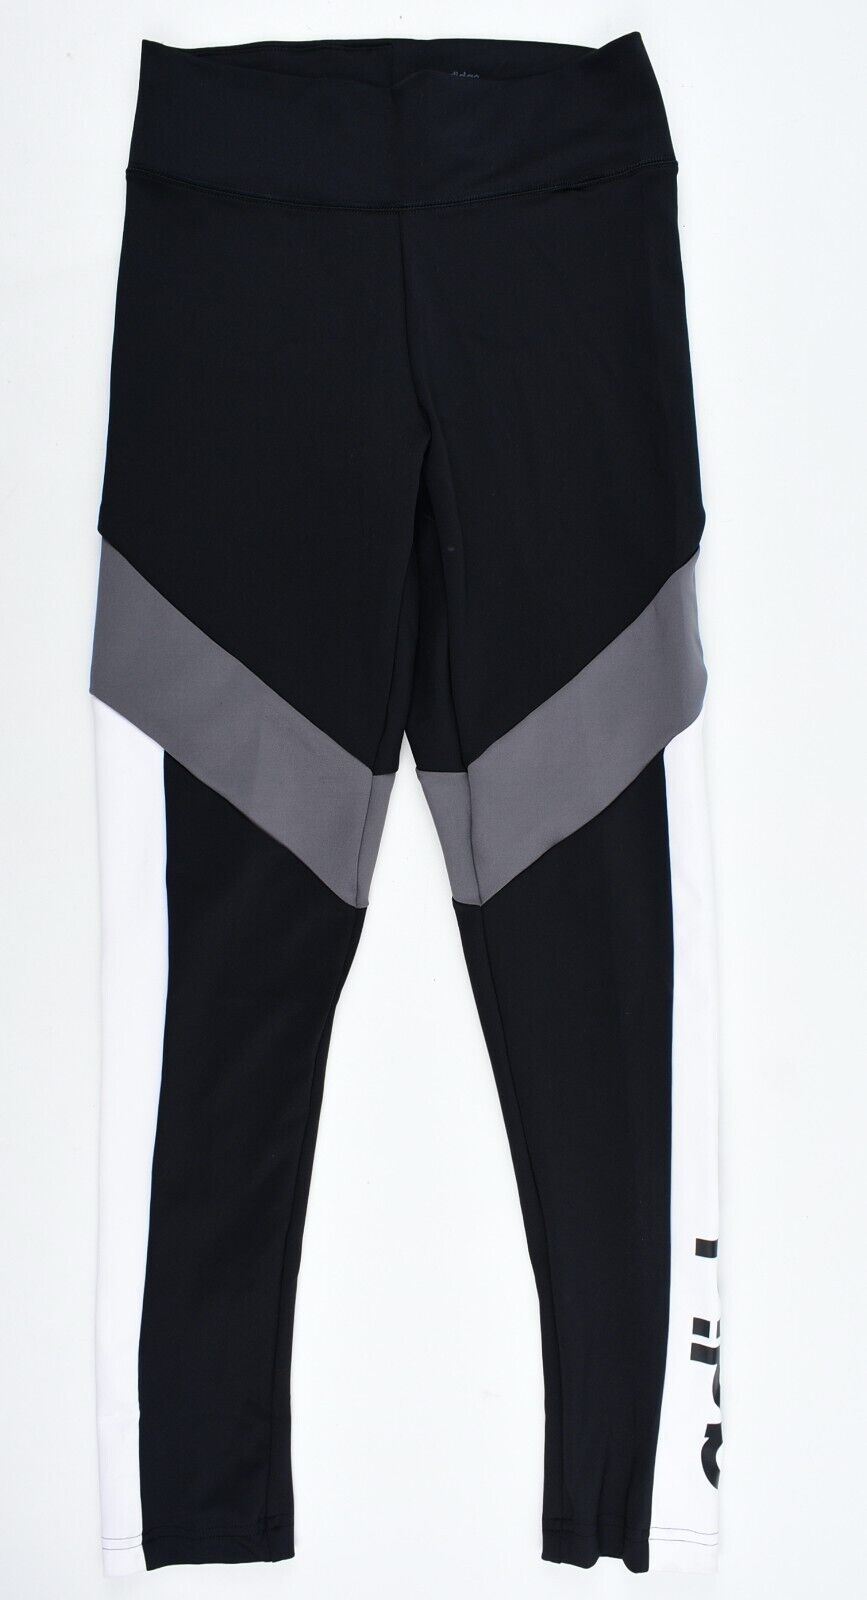 ADIDAS Womens D2M Designed to Move Activewear Leggings, Black/Grey/White size XS